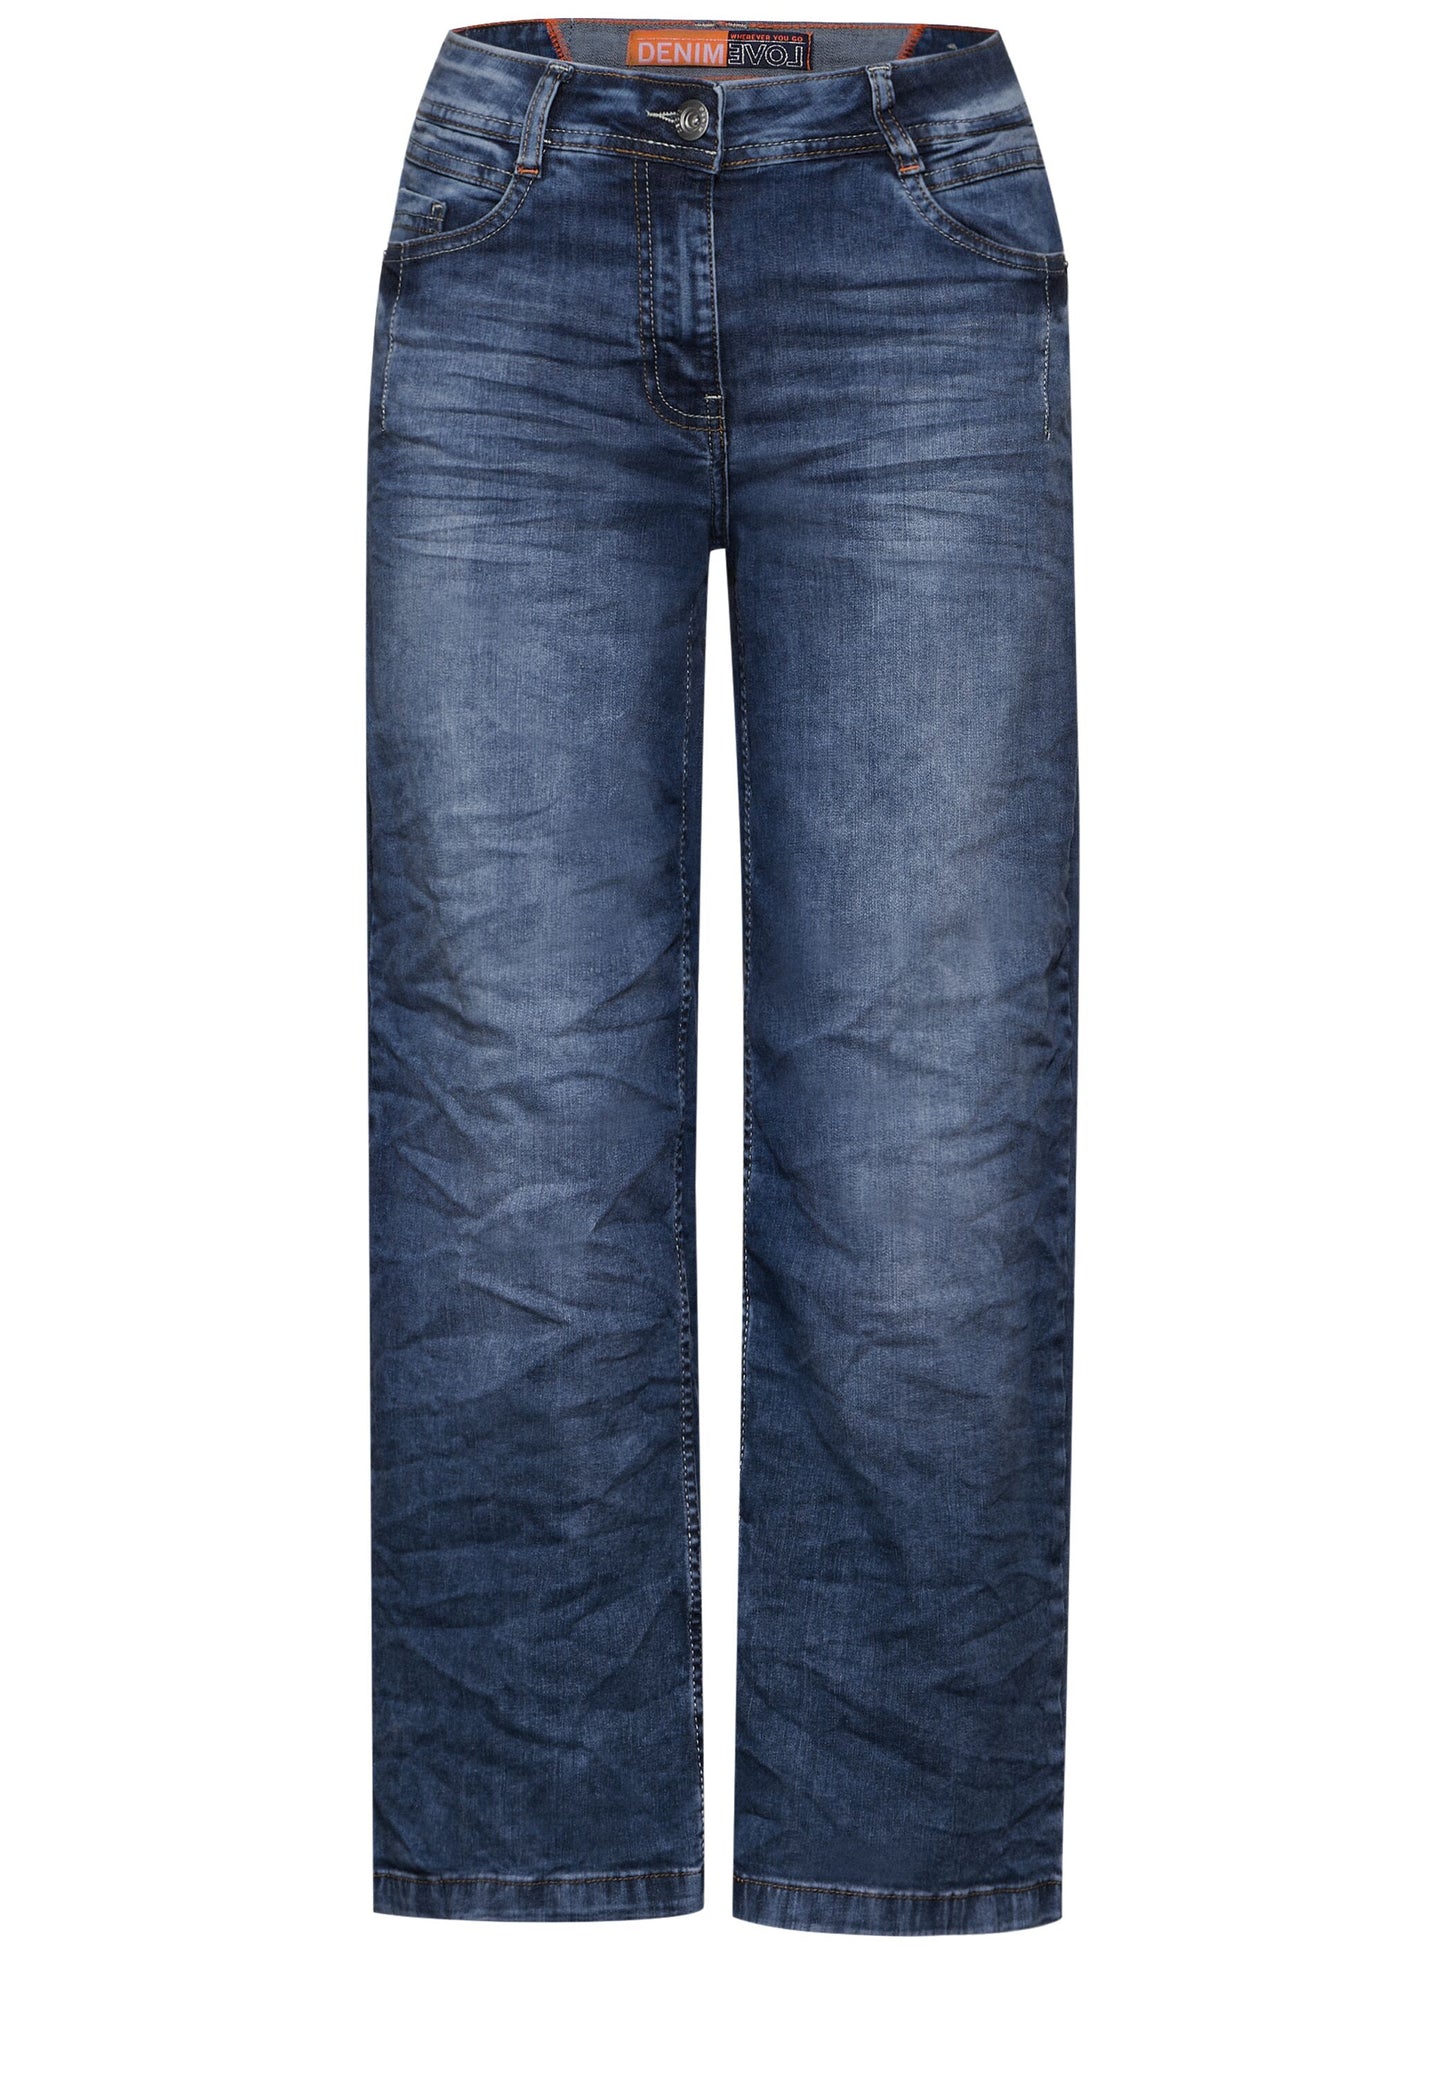 CECIL - Loose Fit Jeans Style Nele - mid blue wash